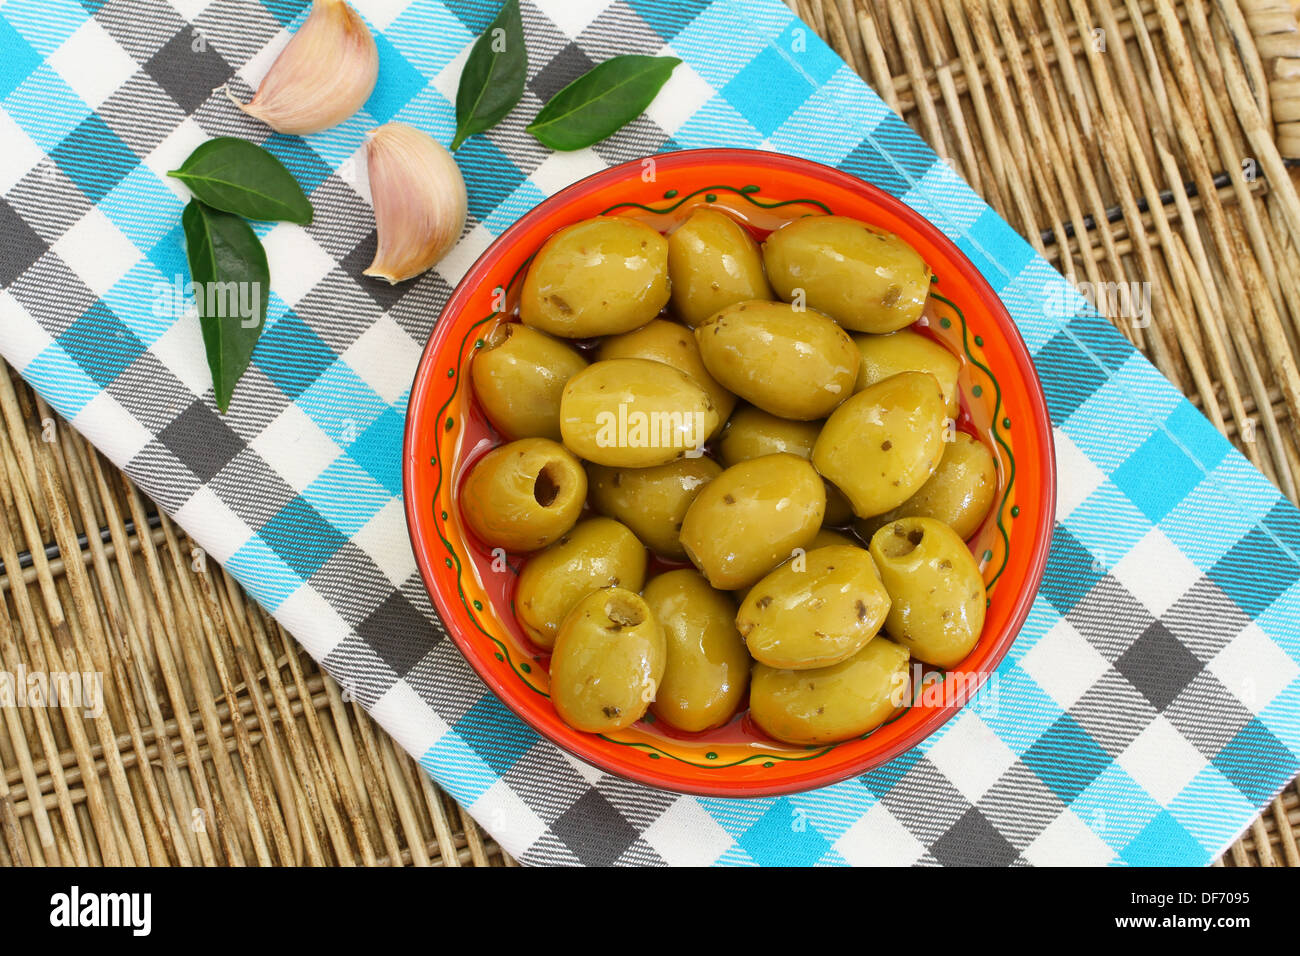 Green olives with garlic Stock Photo